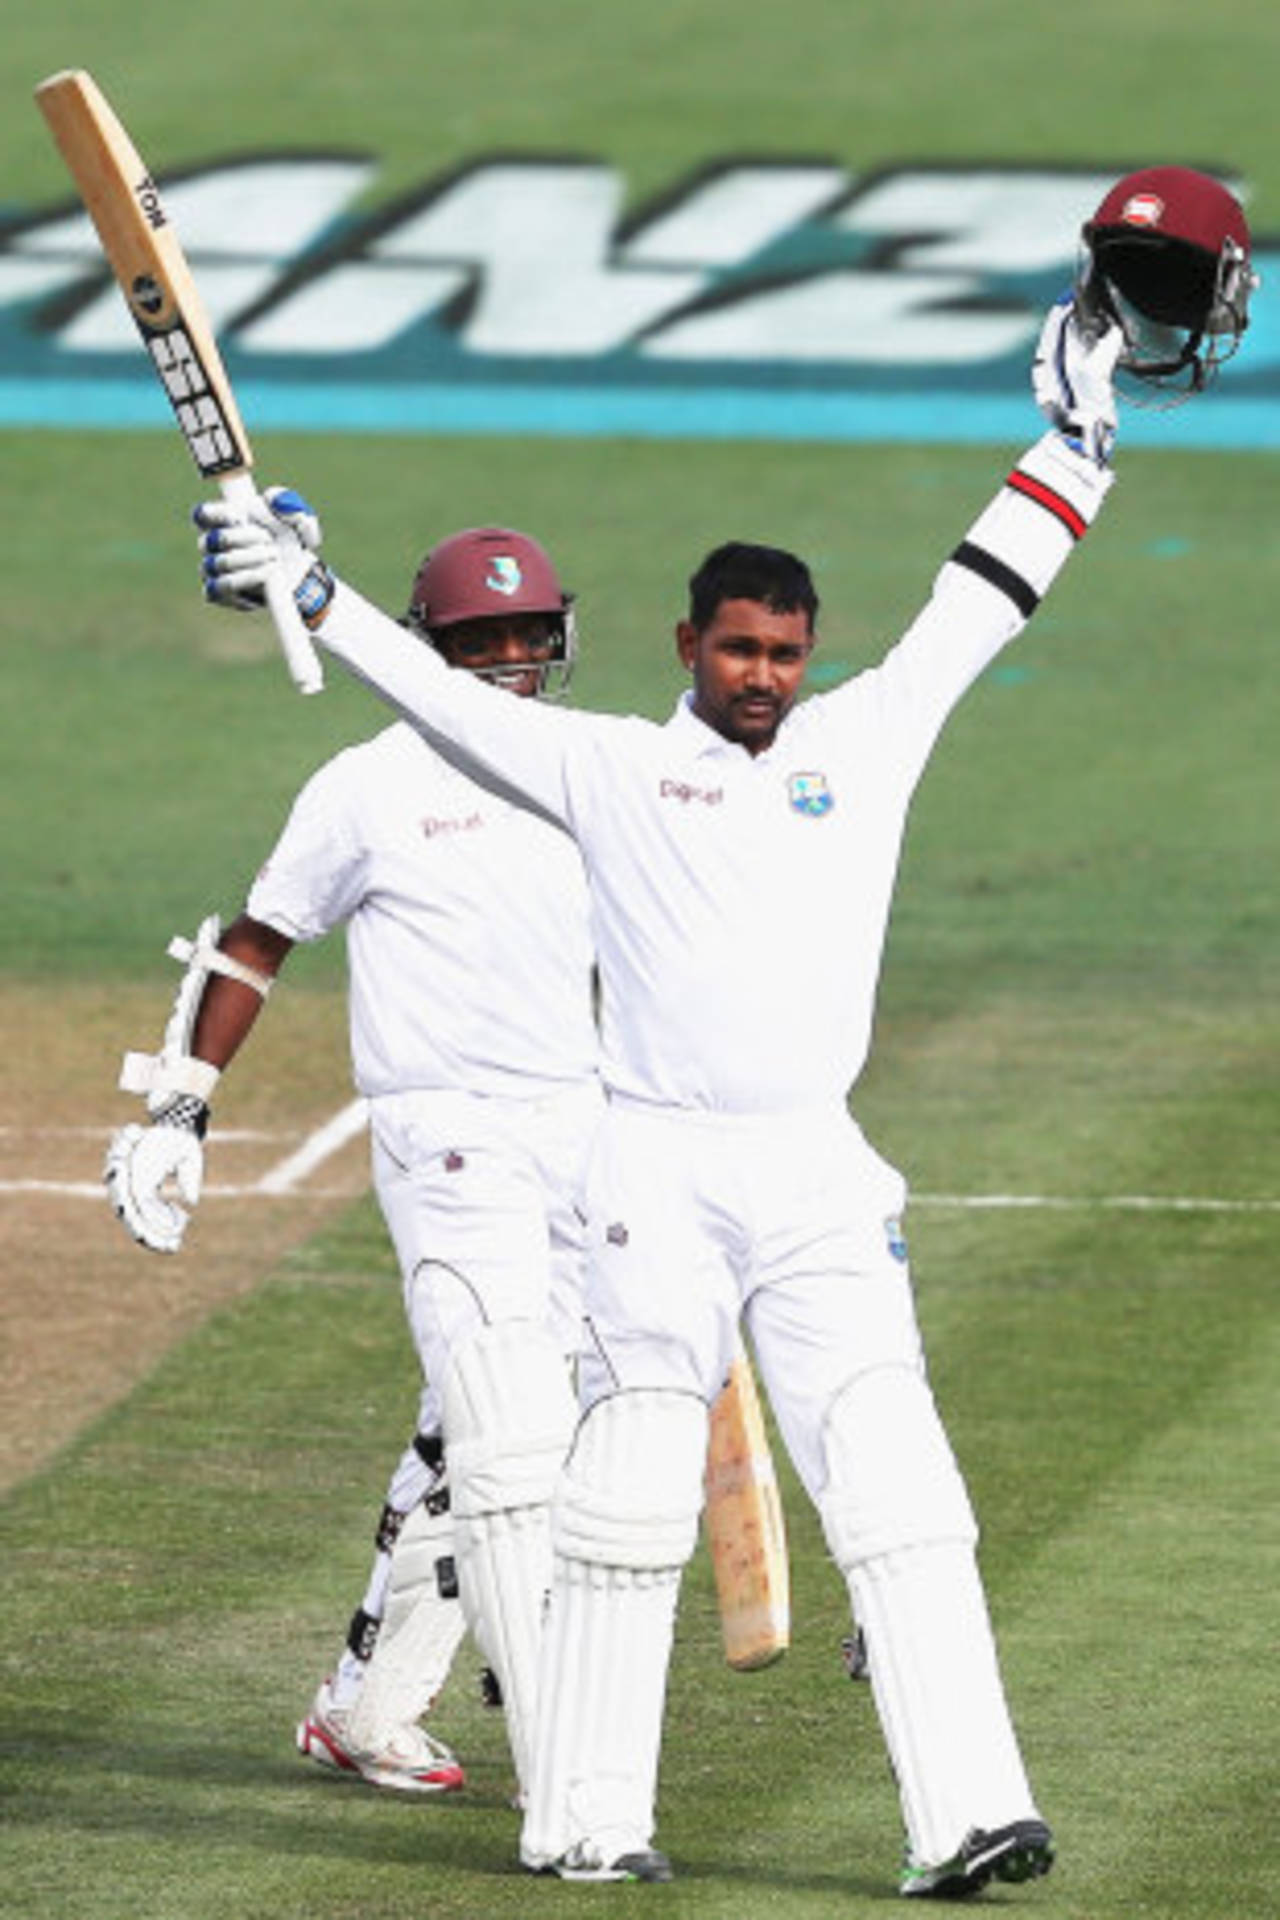 Denesh Ramdin acknowledges the applause after reaching his hundred, New Zealand v West Indies, 3rd Test, Hamilton, 1st day, December 19, 2013